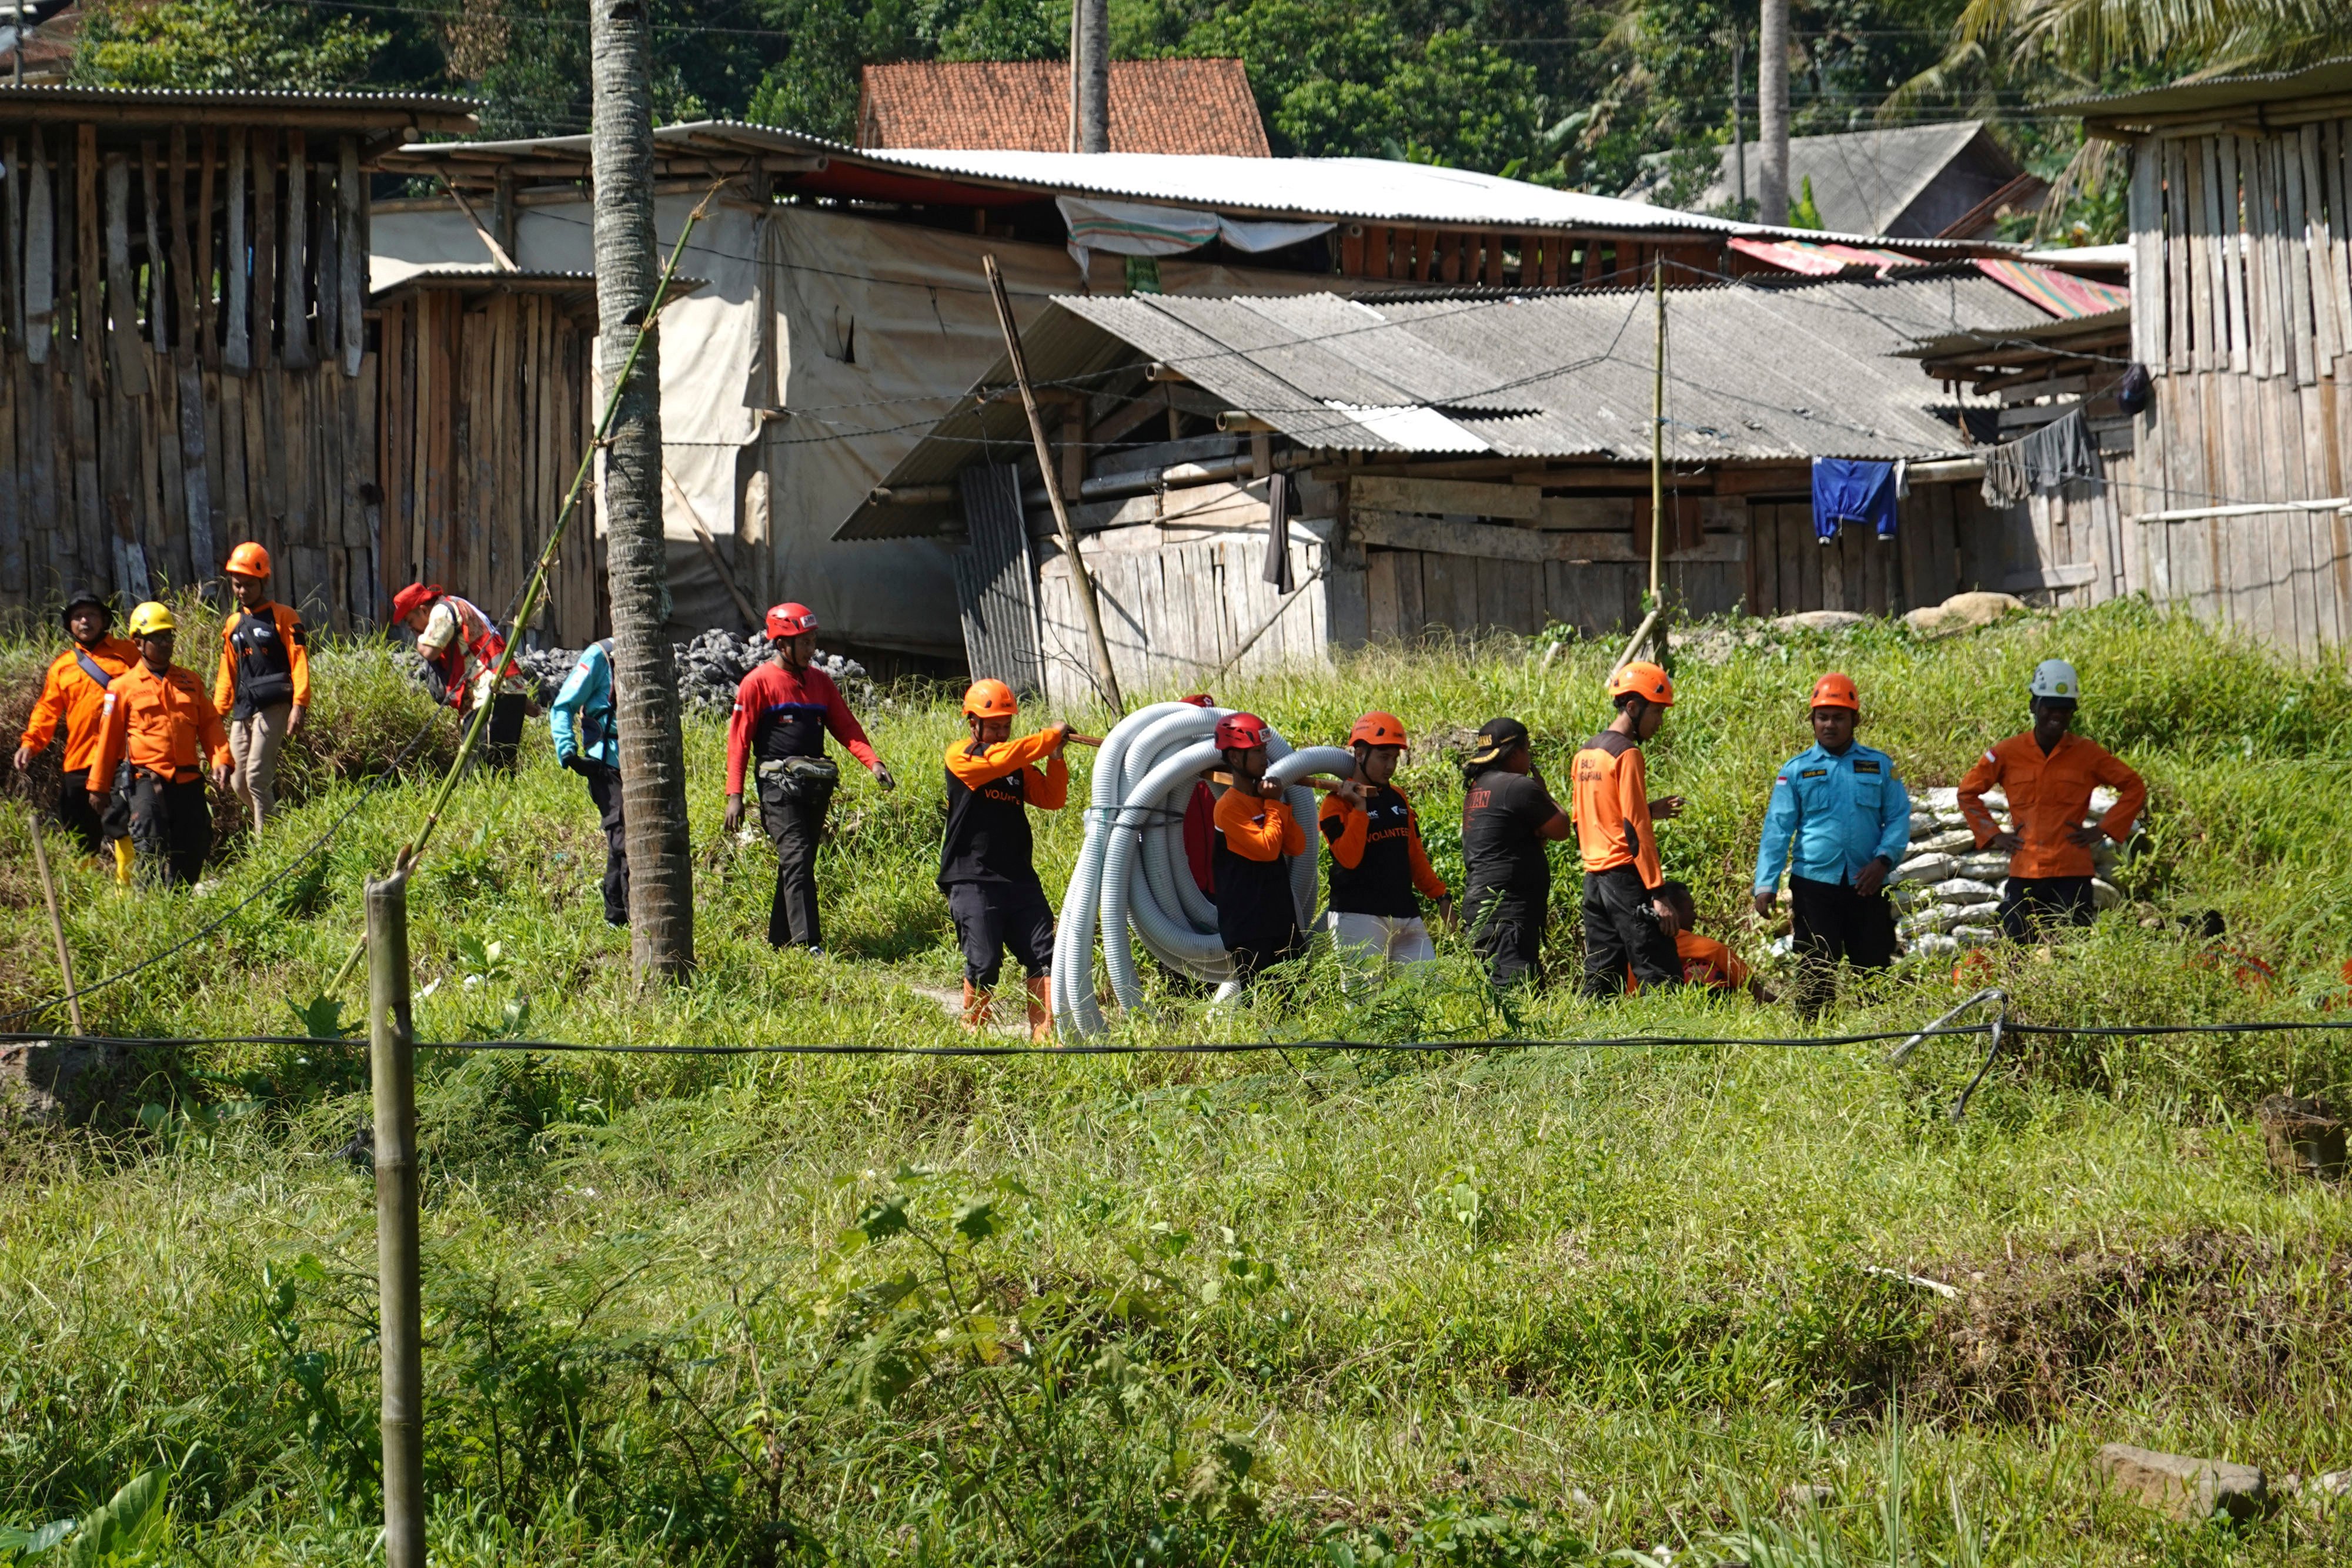 Workers prepare a rescue attempt to save miners trapped at an illegal mining area in Banyumas on July 27. Photo: AP